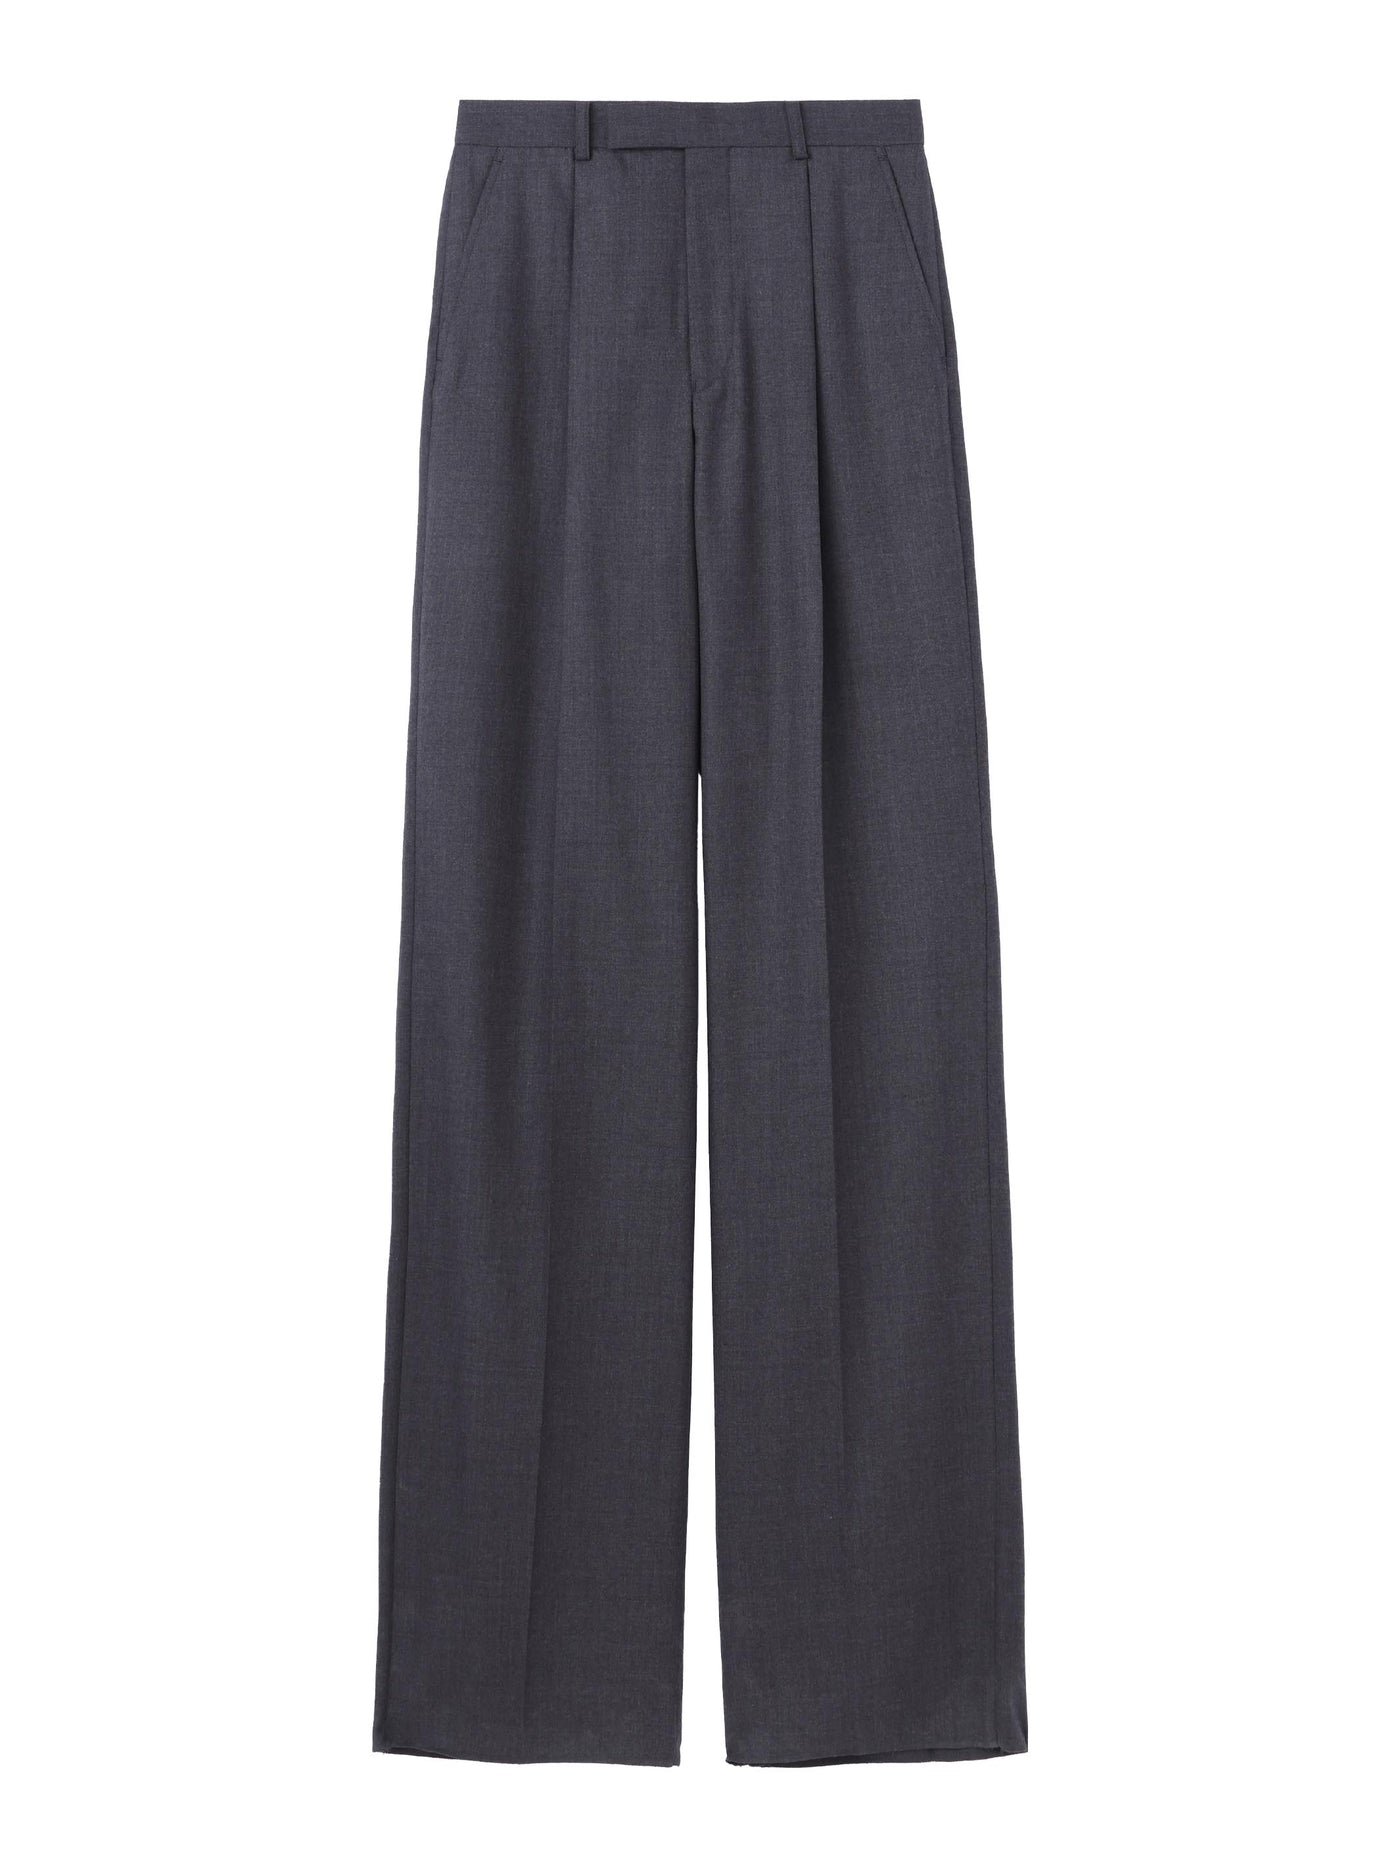 Surge tapered trousers